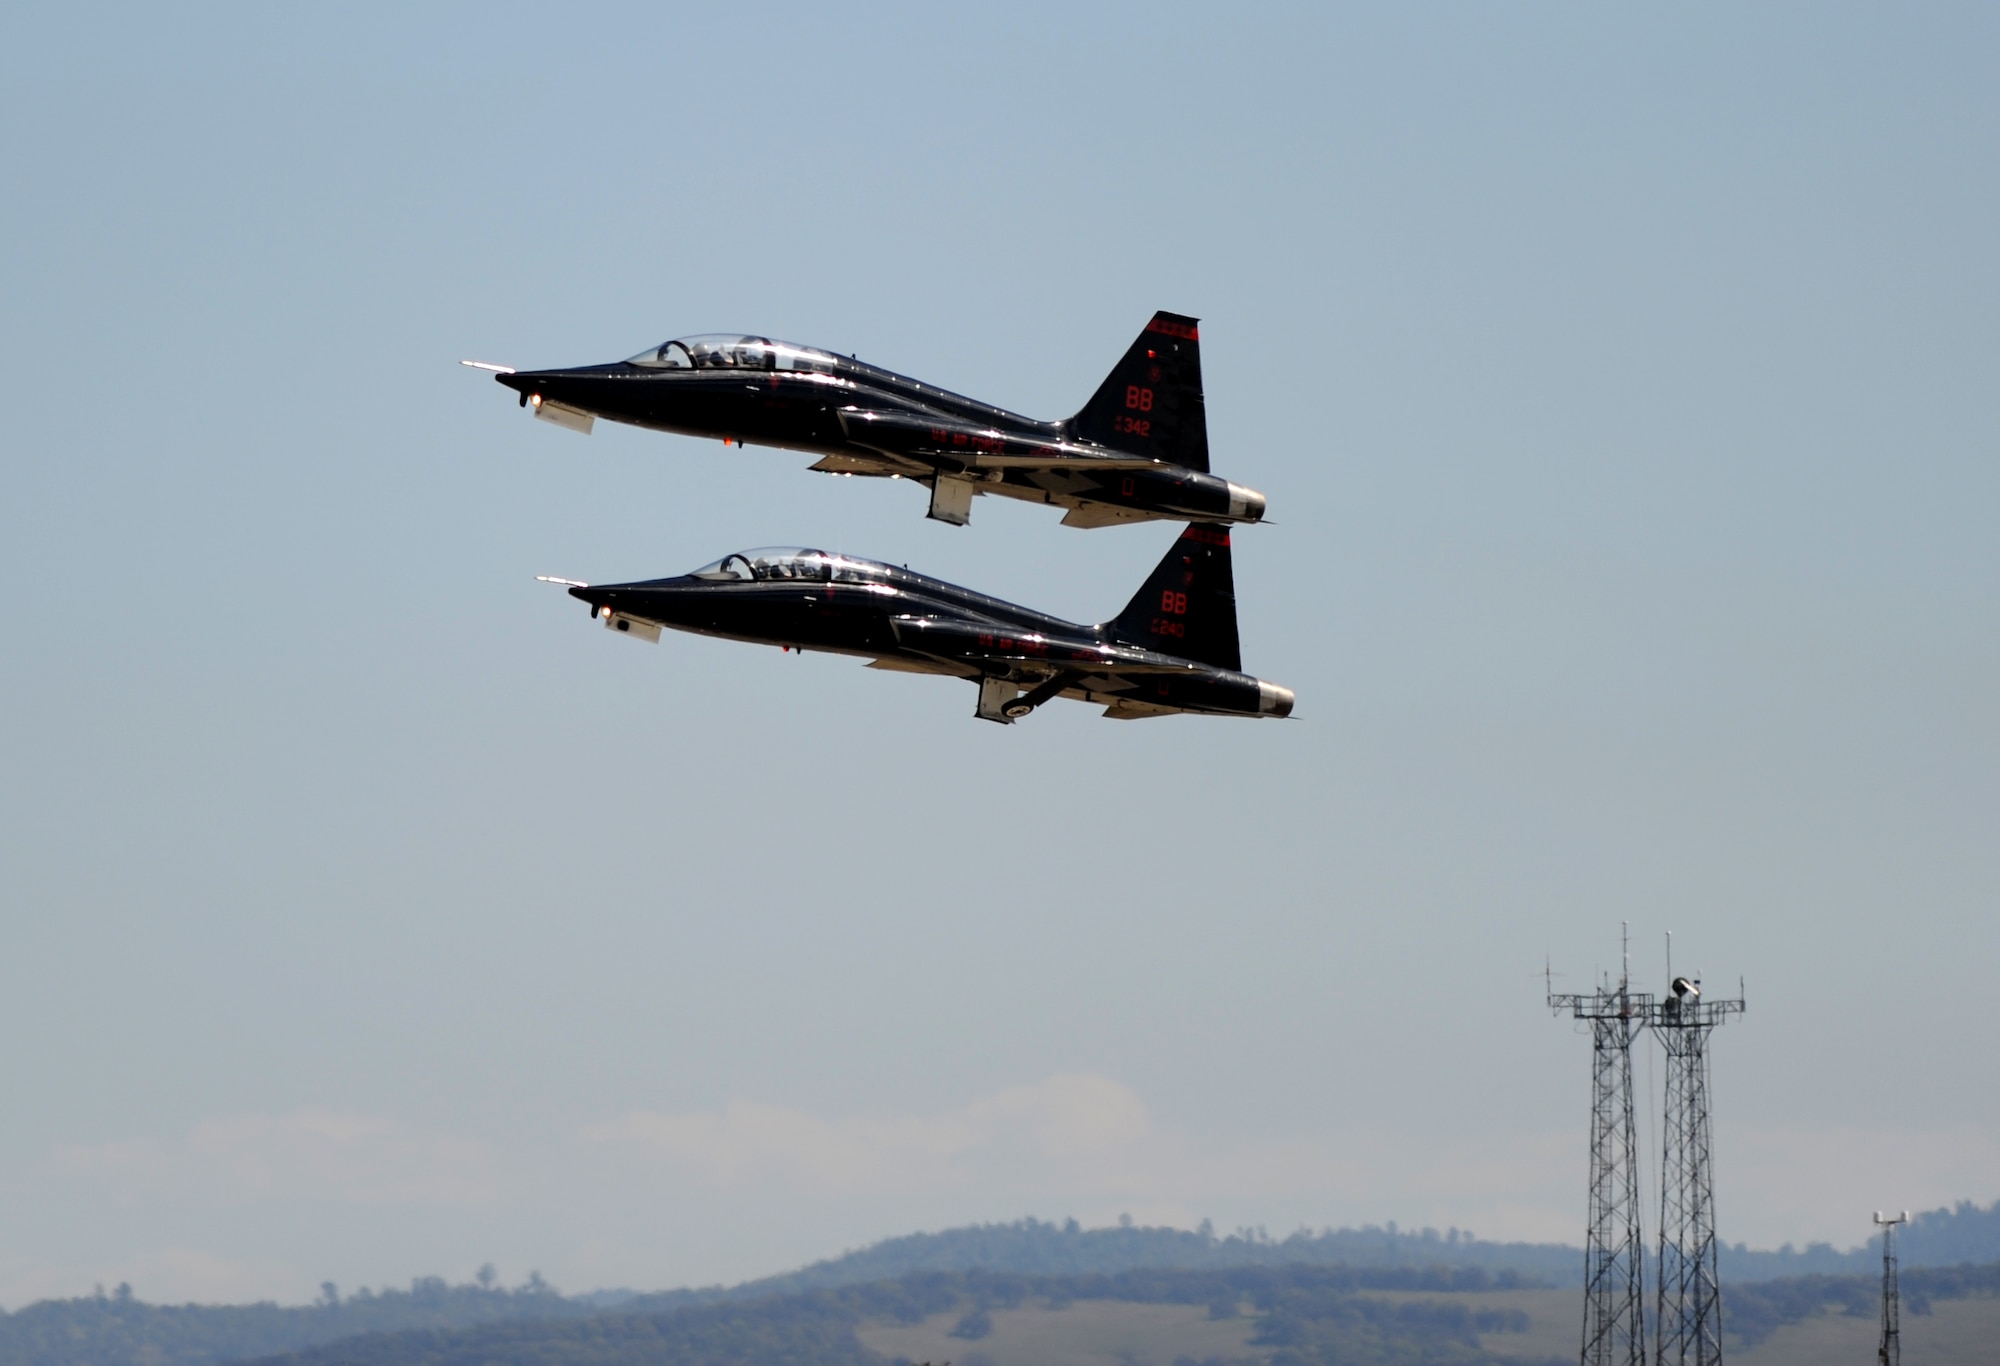 Two T-38 Talon jet trainer aircraft raise their landing gear during a take off at Beale Air Force Base, Calif. Feb. 28, 2013. Beale’s Talons are painted black to mirror the U-2 “Dragon Lady.” (U.S. Air Force photo by Staff Sgt. Robert M. Trujillo/Released)